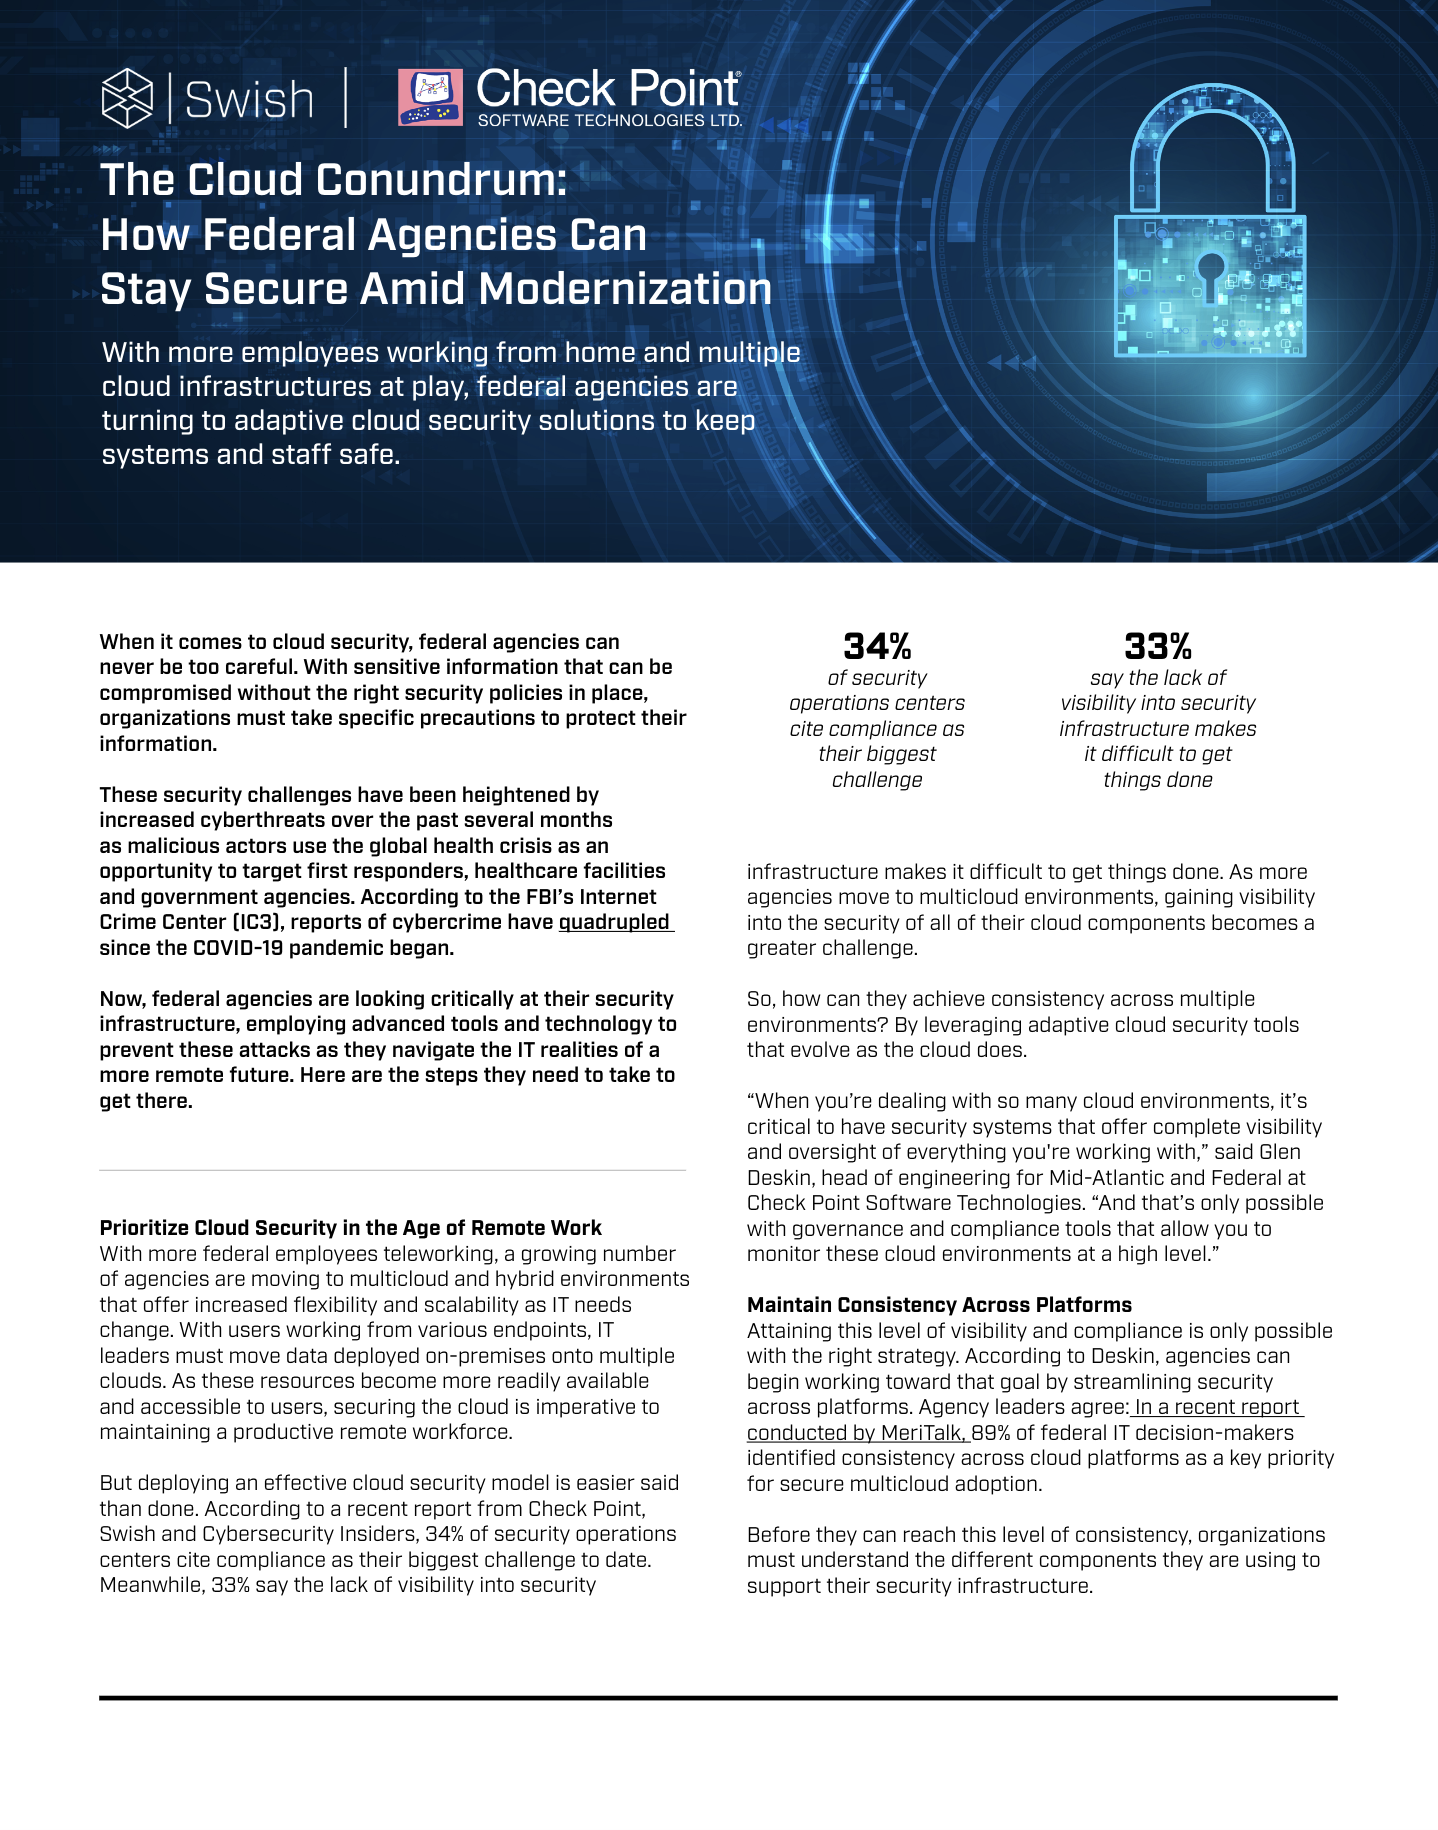 The Cloud Conundrum case study cover page